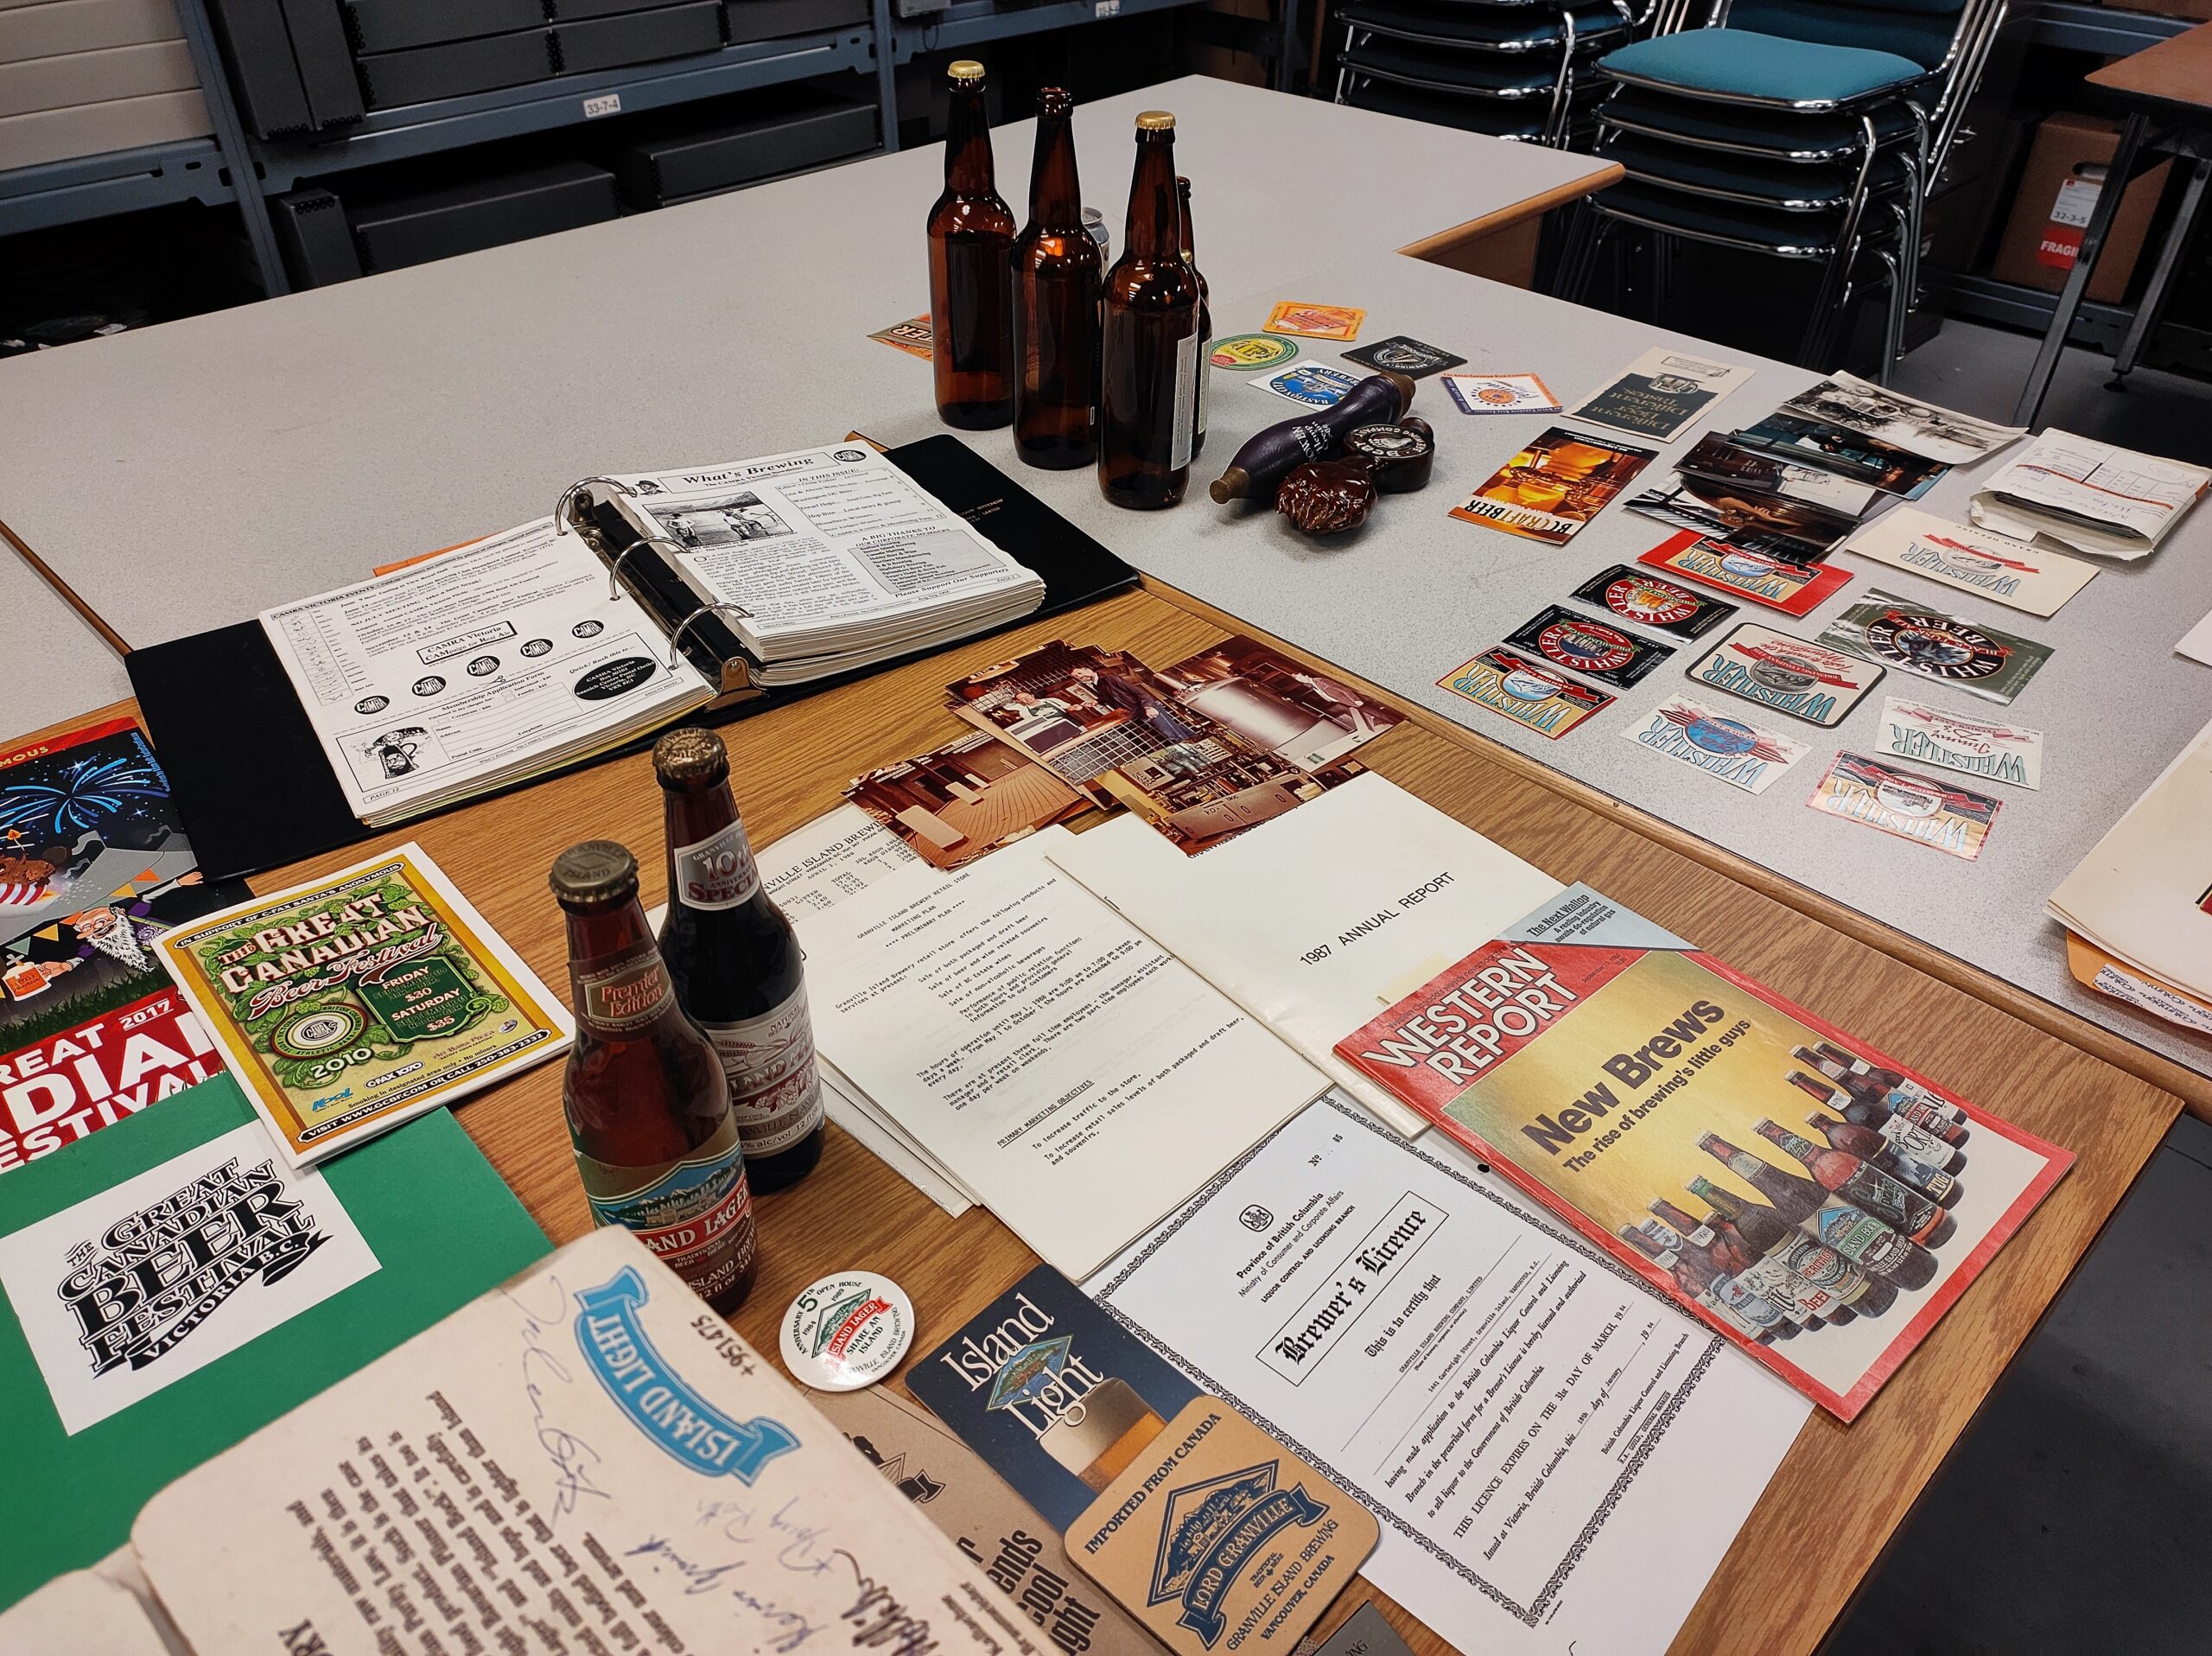 This is a photo of part of the SFU beer archives collection. Various beer memorabilia and artifacts are shown.